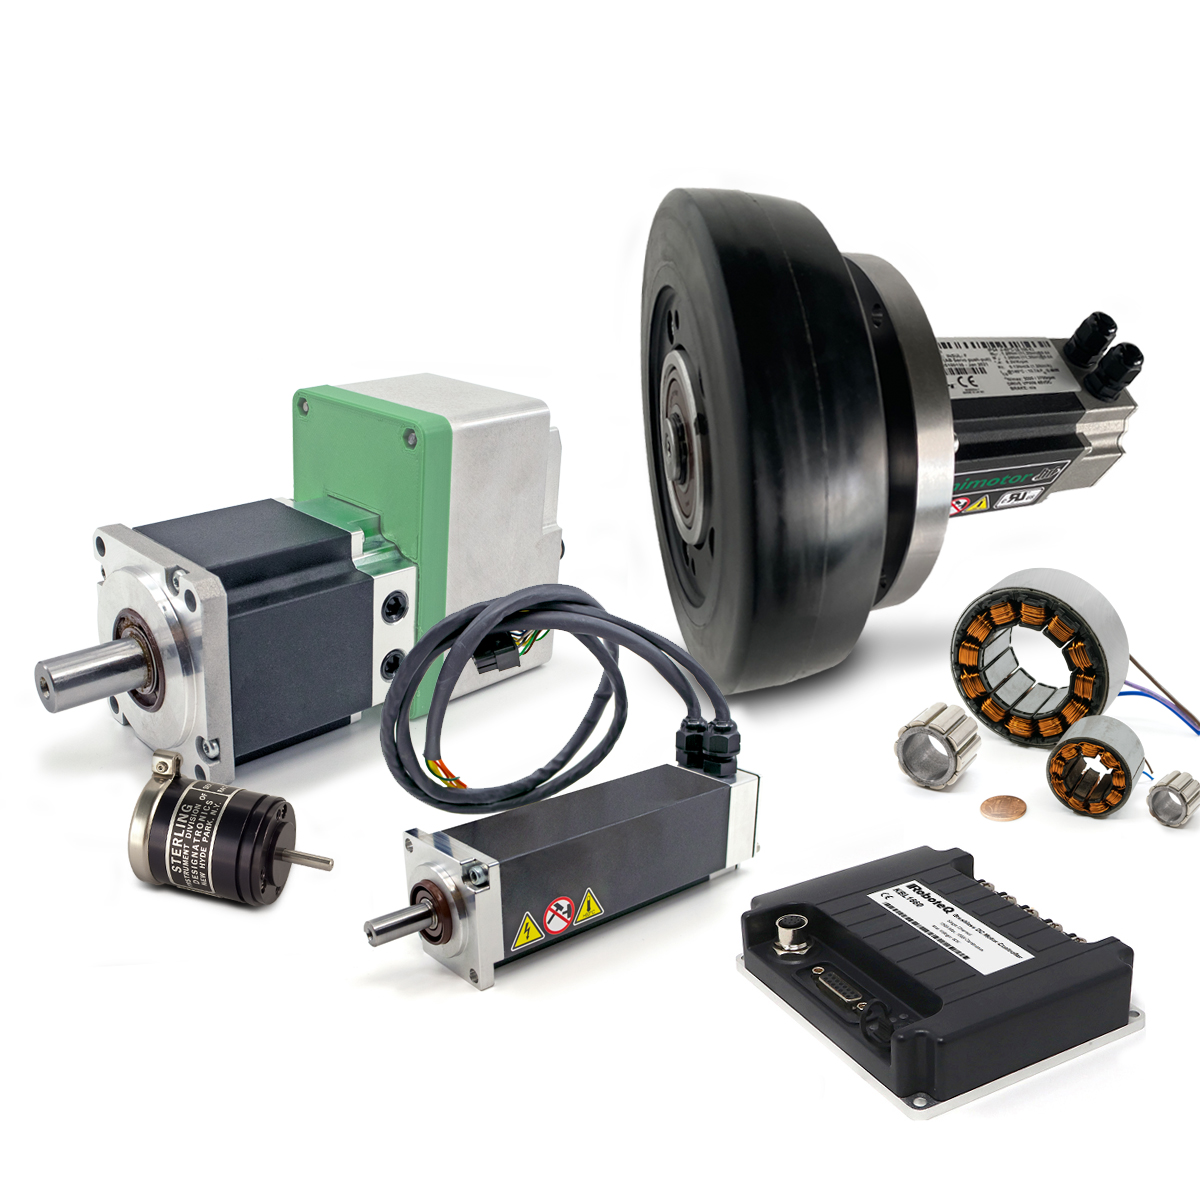 Motors, Gearheads, and Motion Control Products